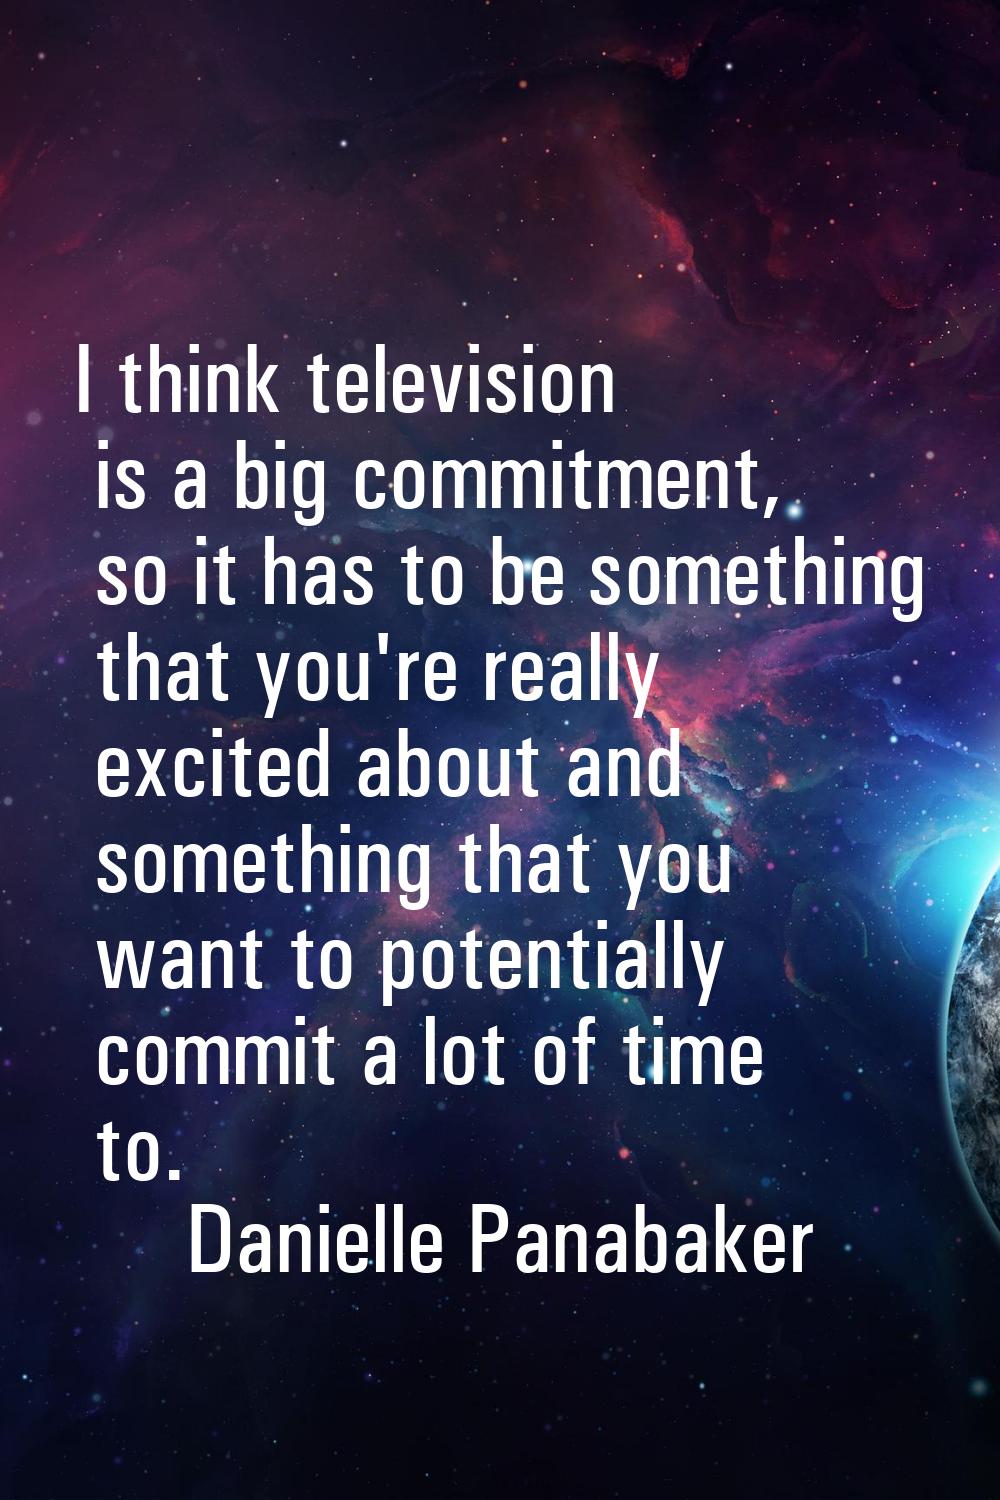 I think television is a big commitment, so it has to be something that you're really excited about 